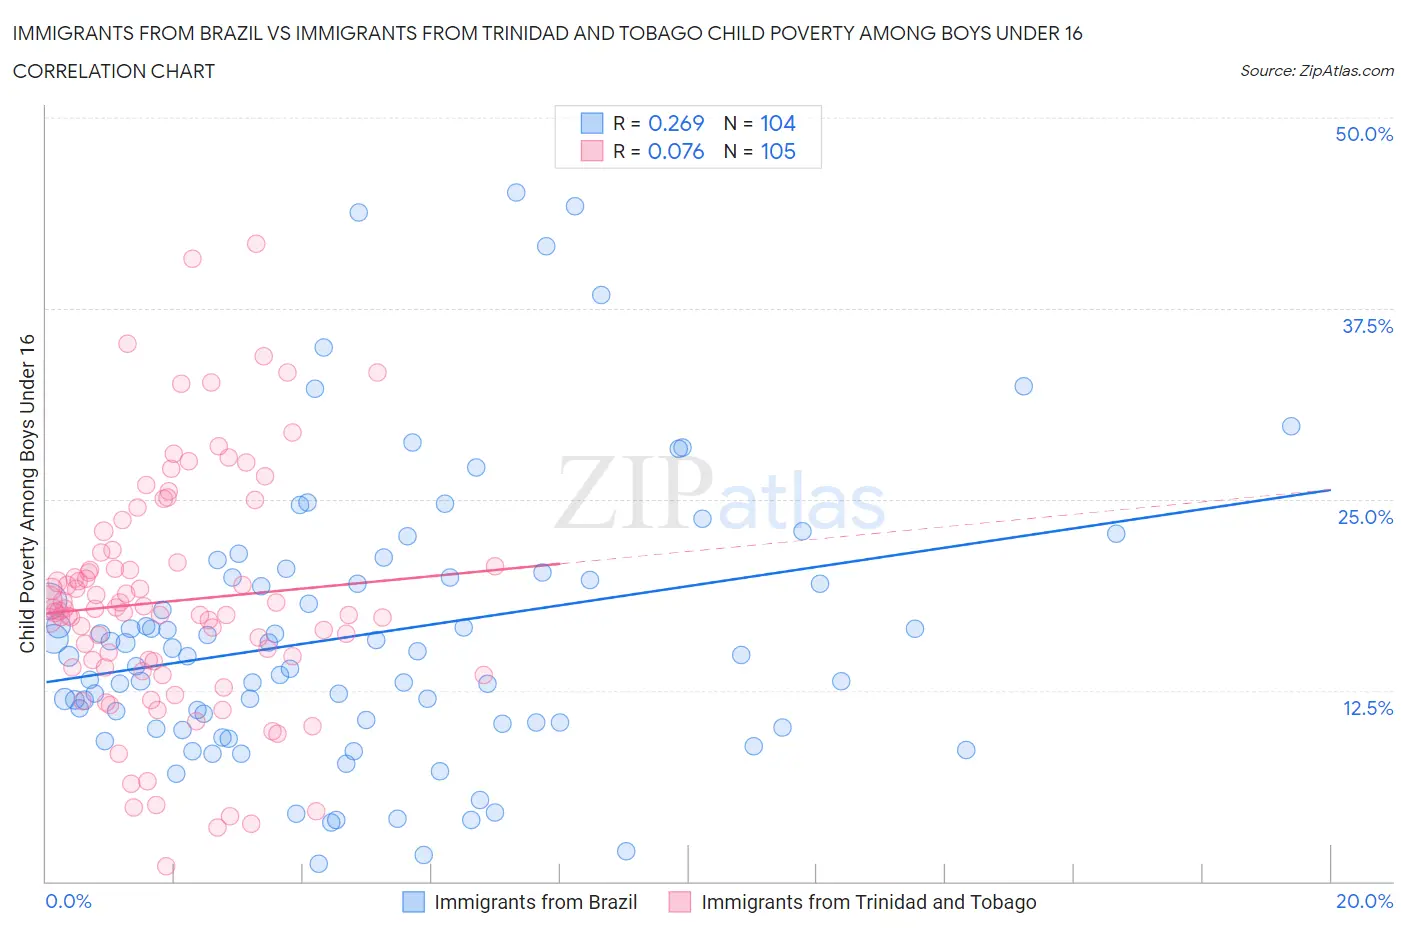 Immigrants from Brazil vs Immigrants from Trinidad and Tobago Child Poverty Among Boys Under 16